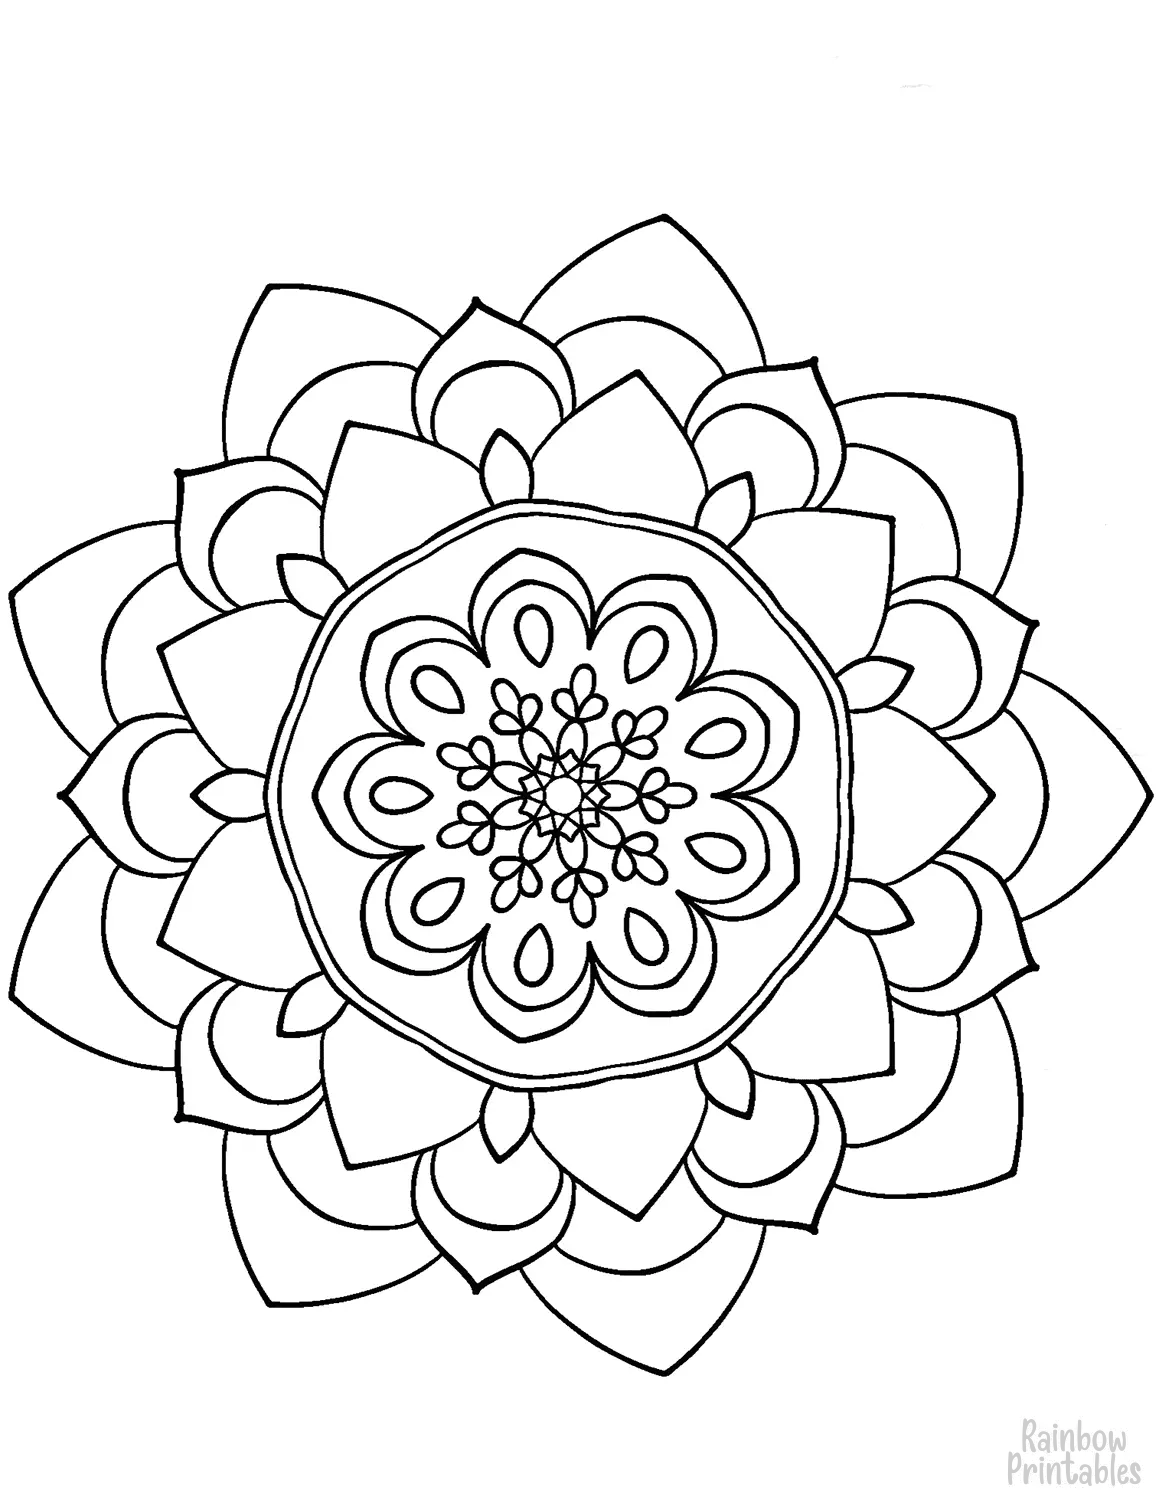 SIMPLE FLORAL FLOWER Mandala Coloring Pages for Kids Adults Boredom Art Activities Line Art